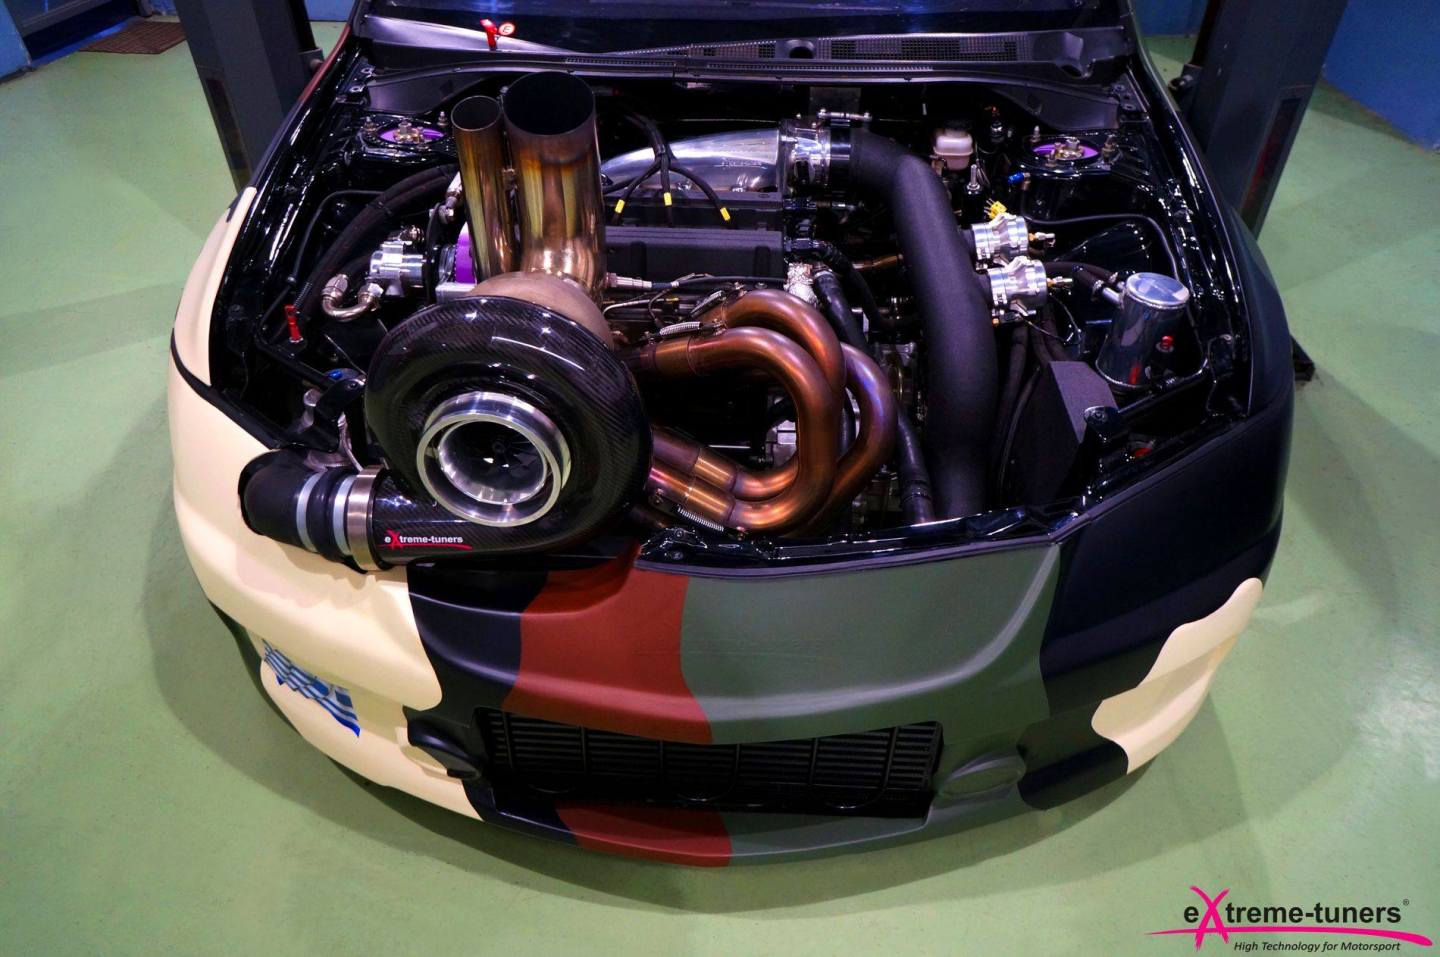 That's a decent sized turbo, eh? This Mitsubishi Evo now makes upwards of 2,800 horsepower for drag racing